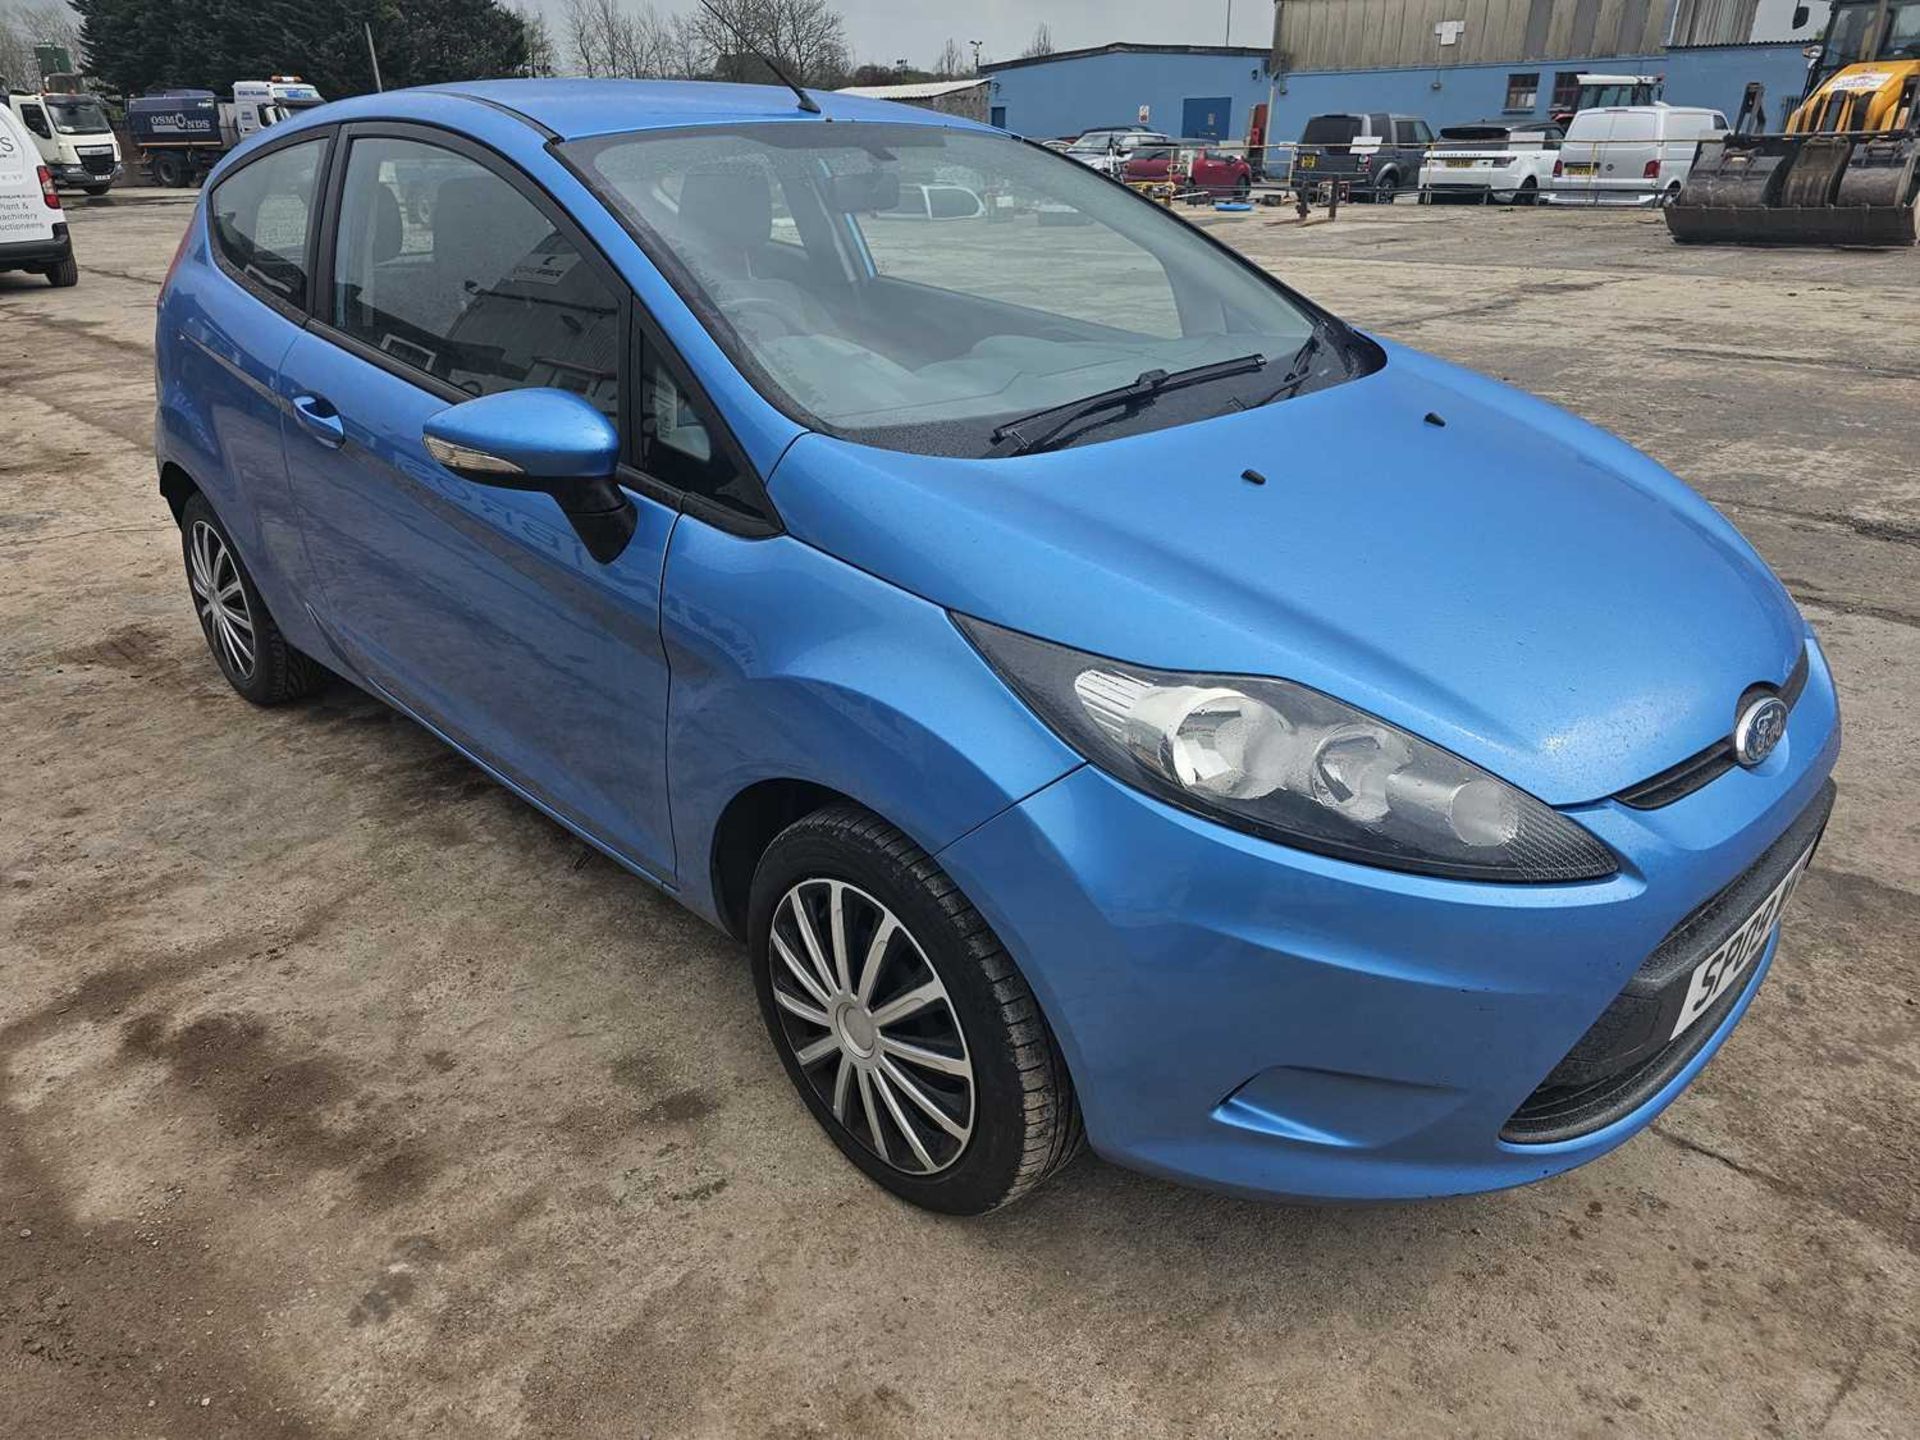 2009 Ford Fiesta Style 82, 5 Speed (Reg. Docs. Available) - Image 7 of 25